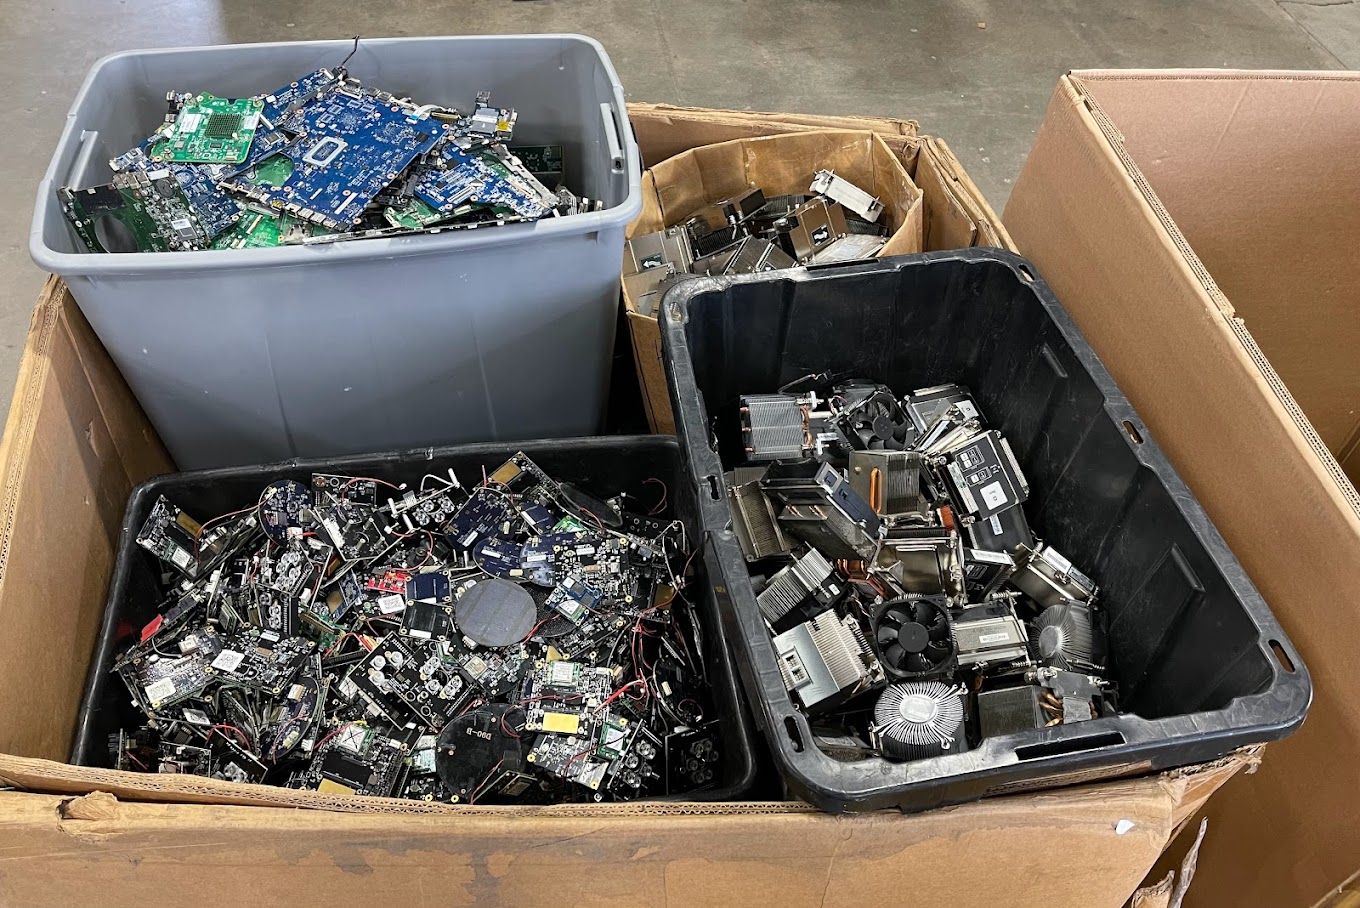 Canton's eco-friendly approach to electronic recycling, offering services in the disposal of electronics and IT equipment, with a focus on sustainable practices.